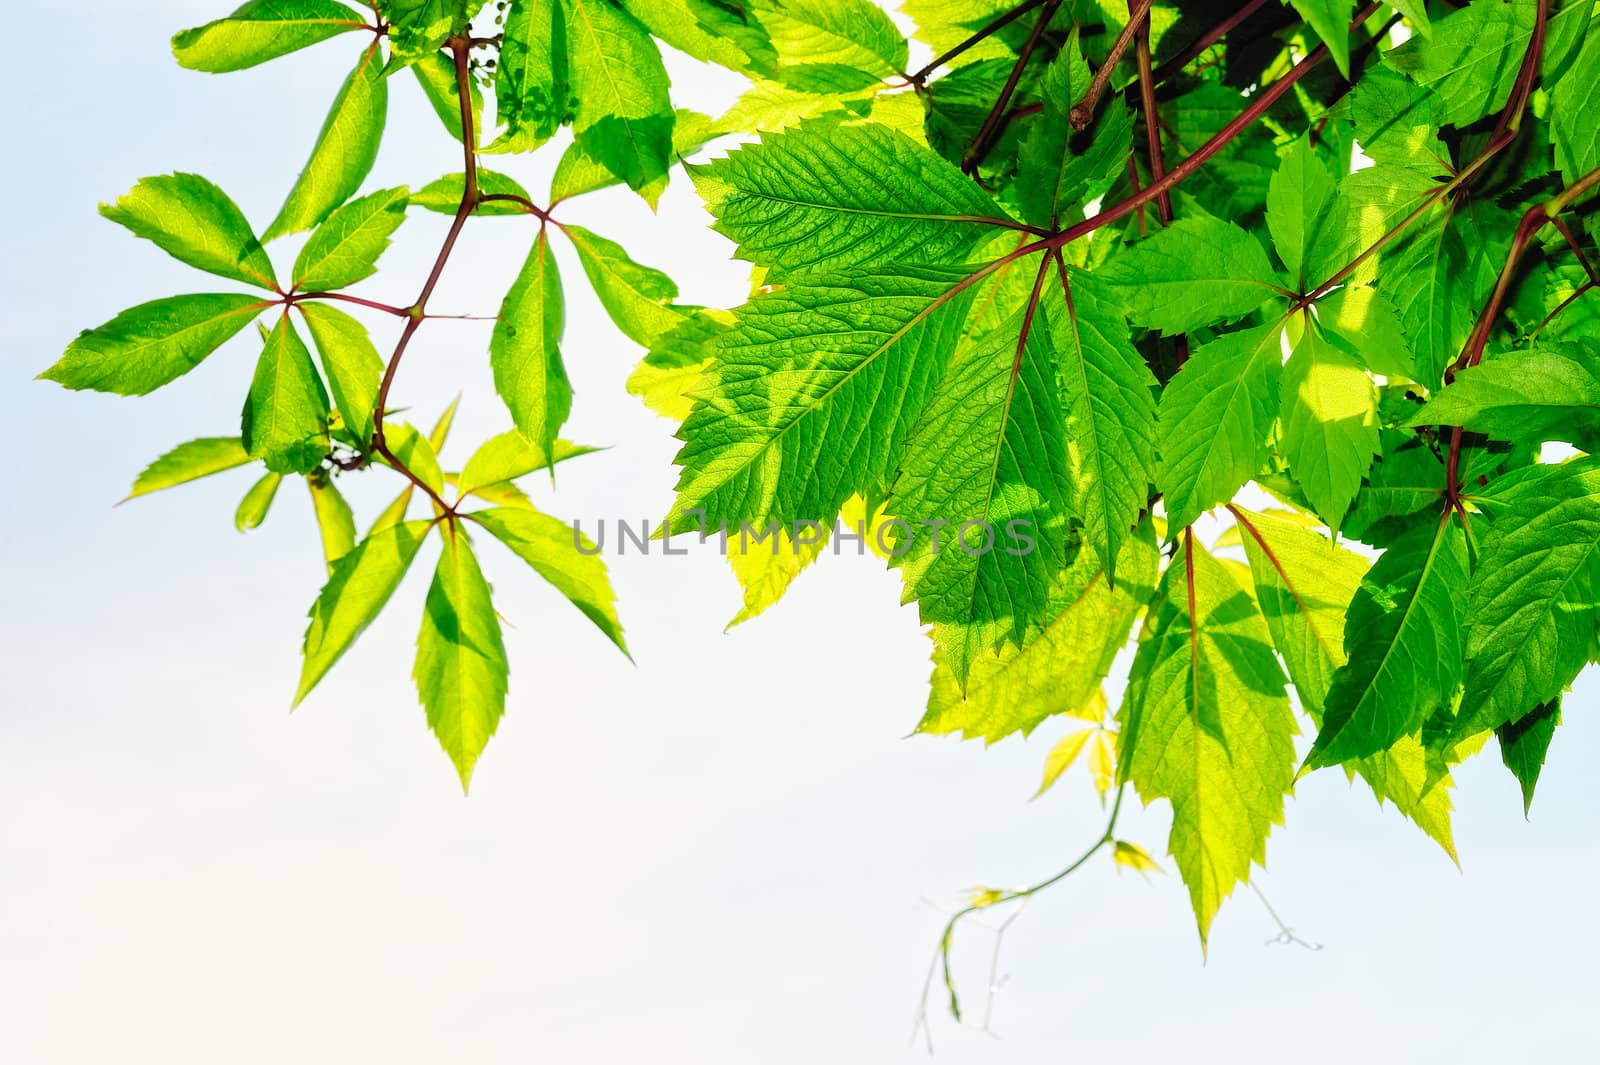 Fresh green leaves on the branches of shrubs